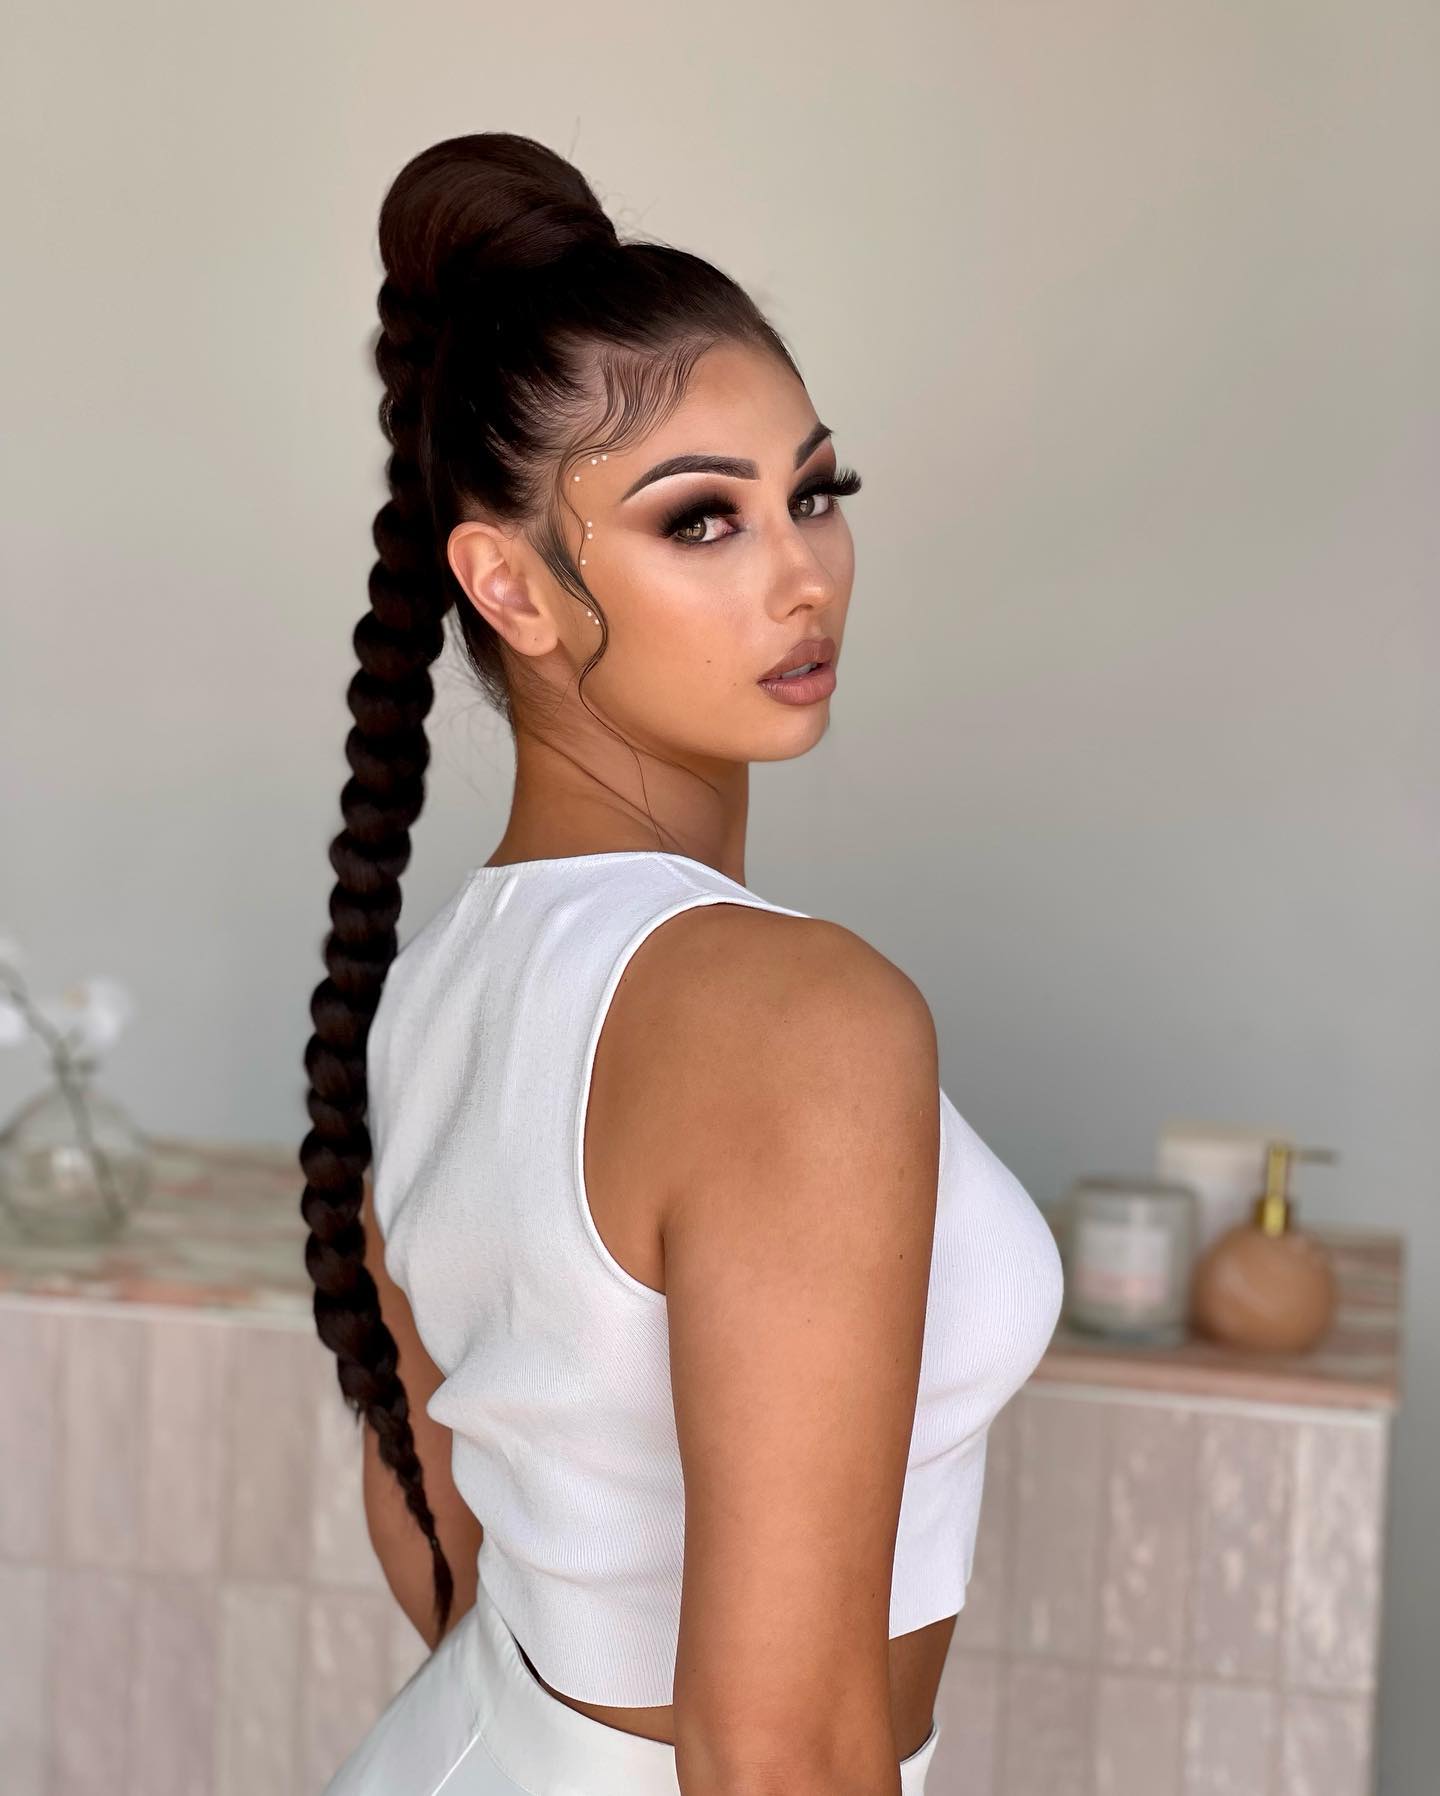 top bun with tail hairstyle for adult girls